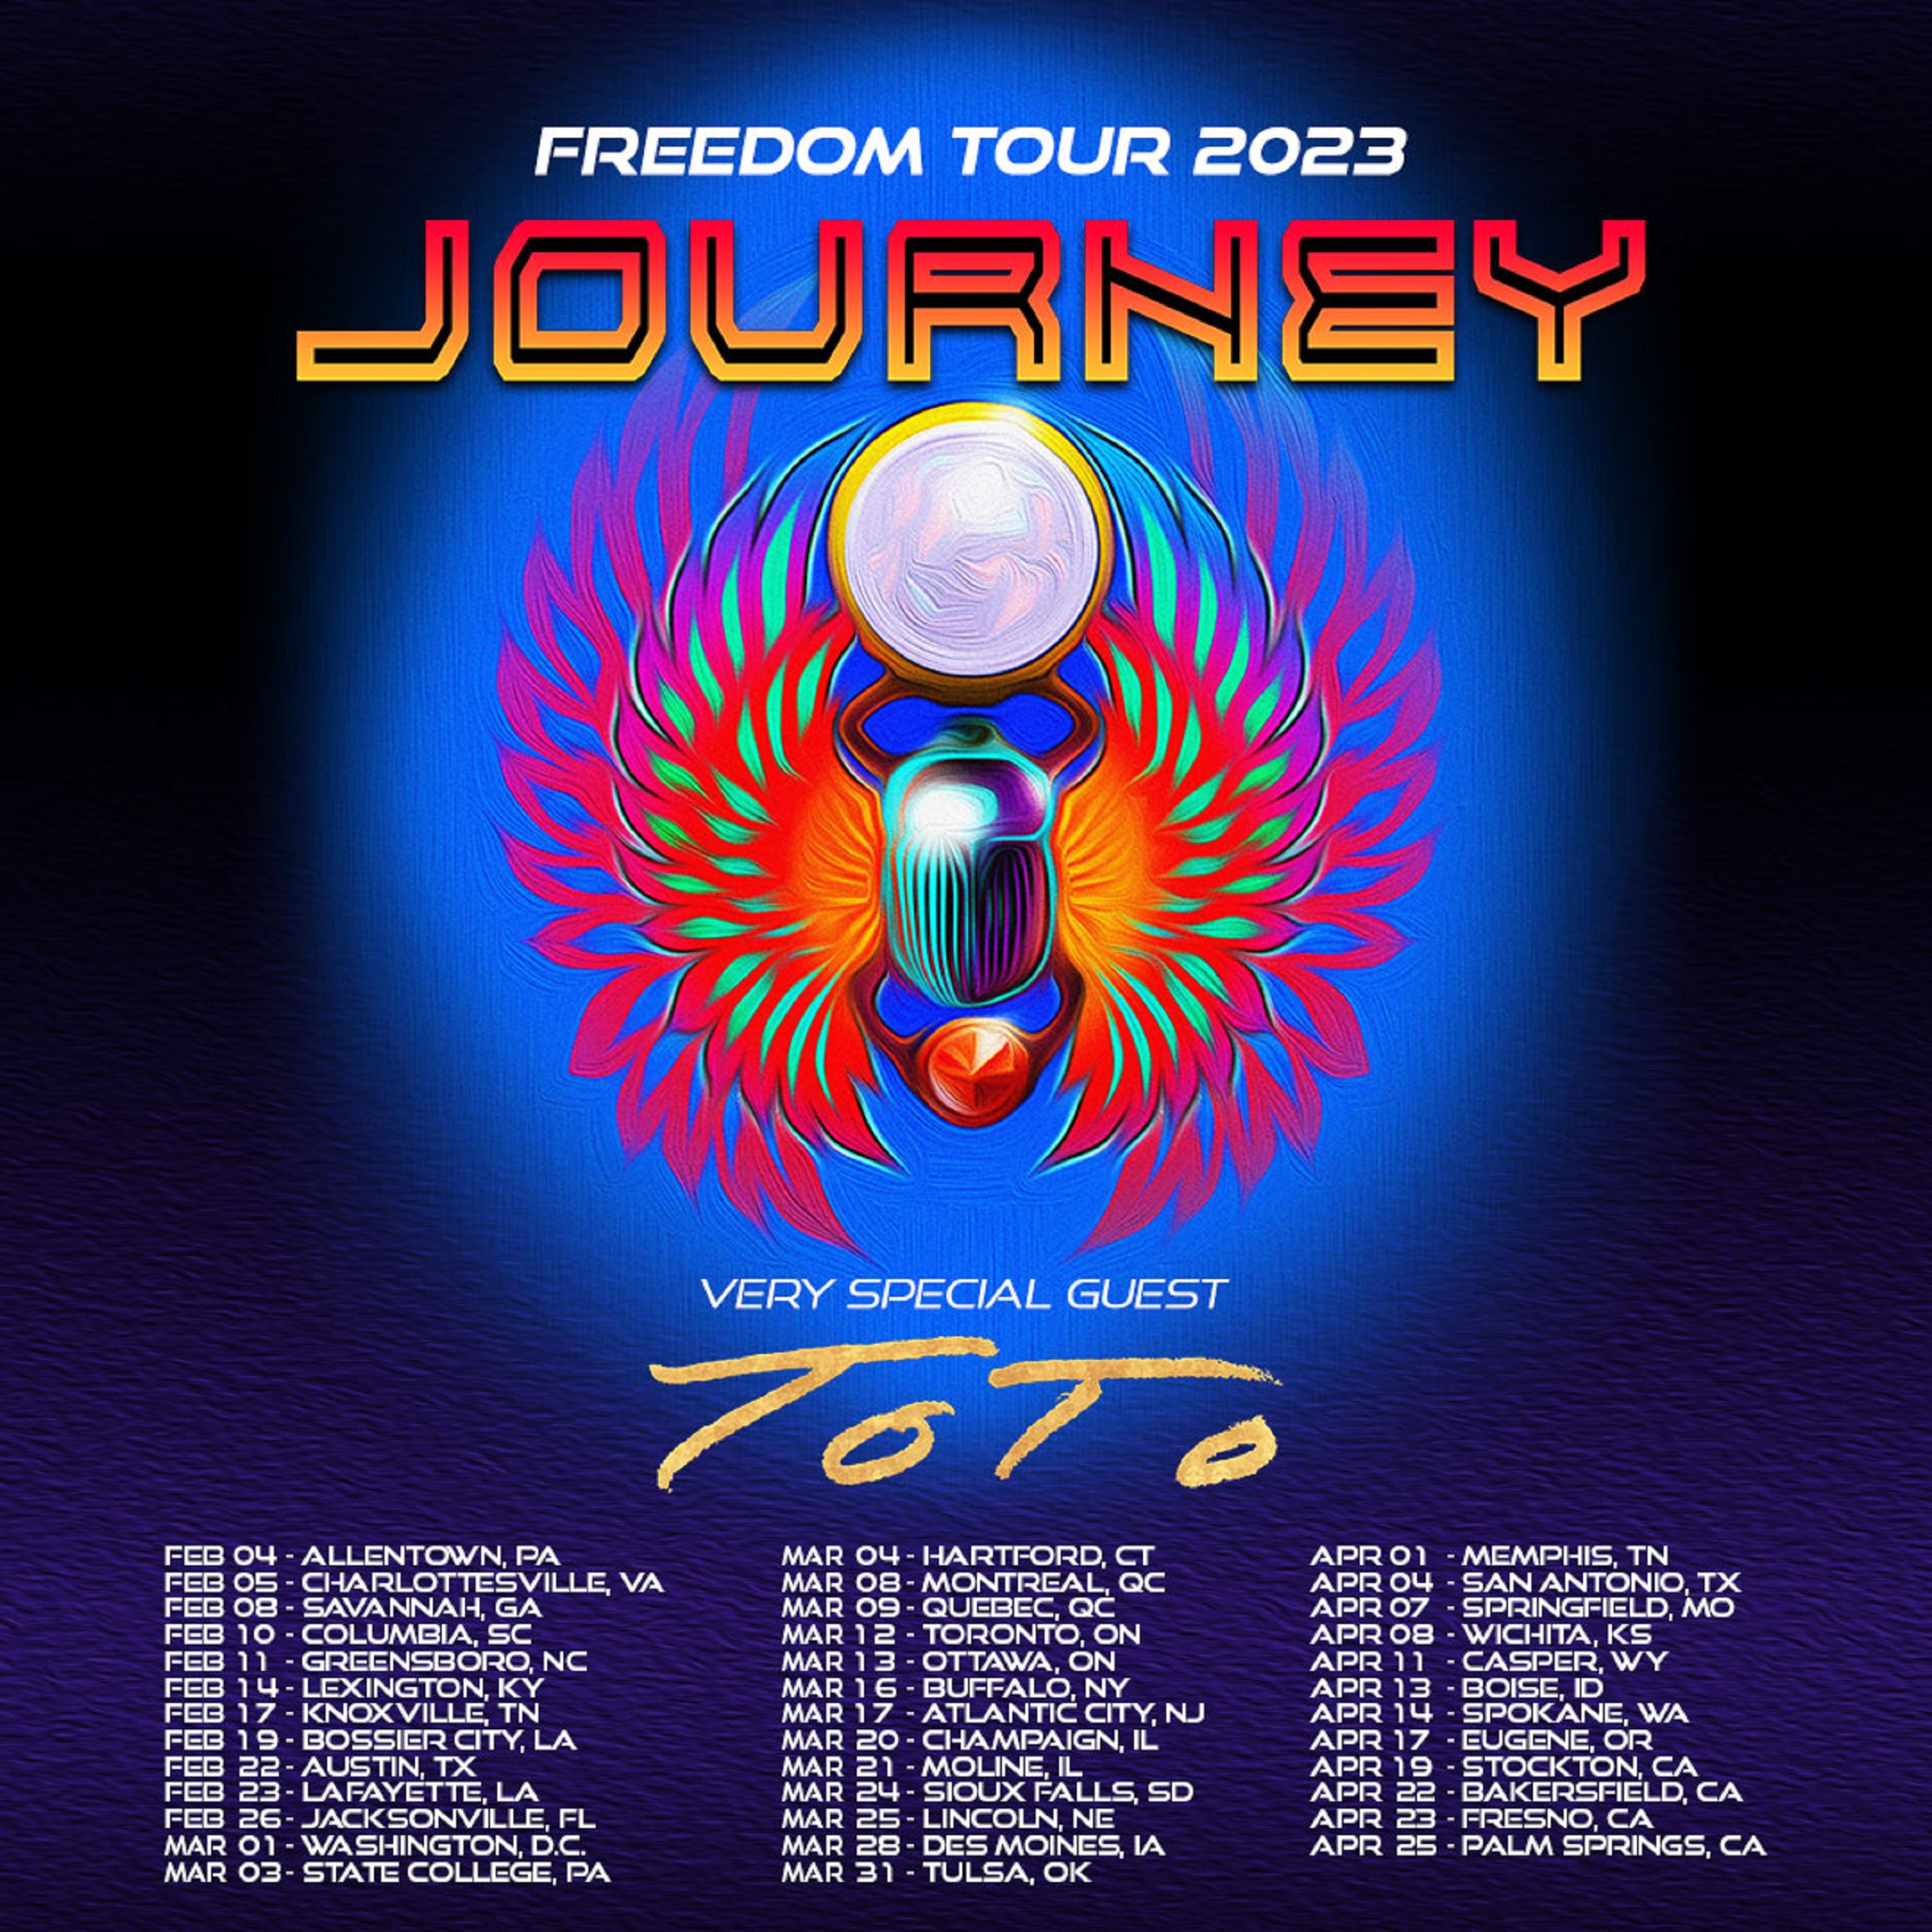 LEGENDARY ROCK BAND JOURNEY CELEBRATING THE 50TH ANNIVERSARY FREEDOM TOUR 2023